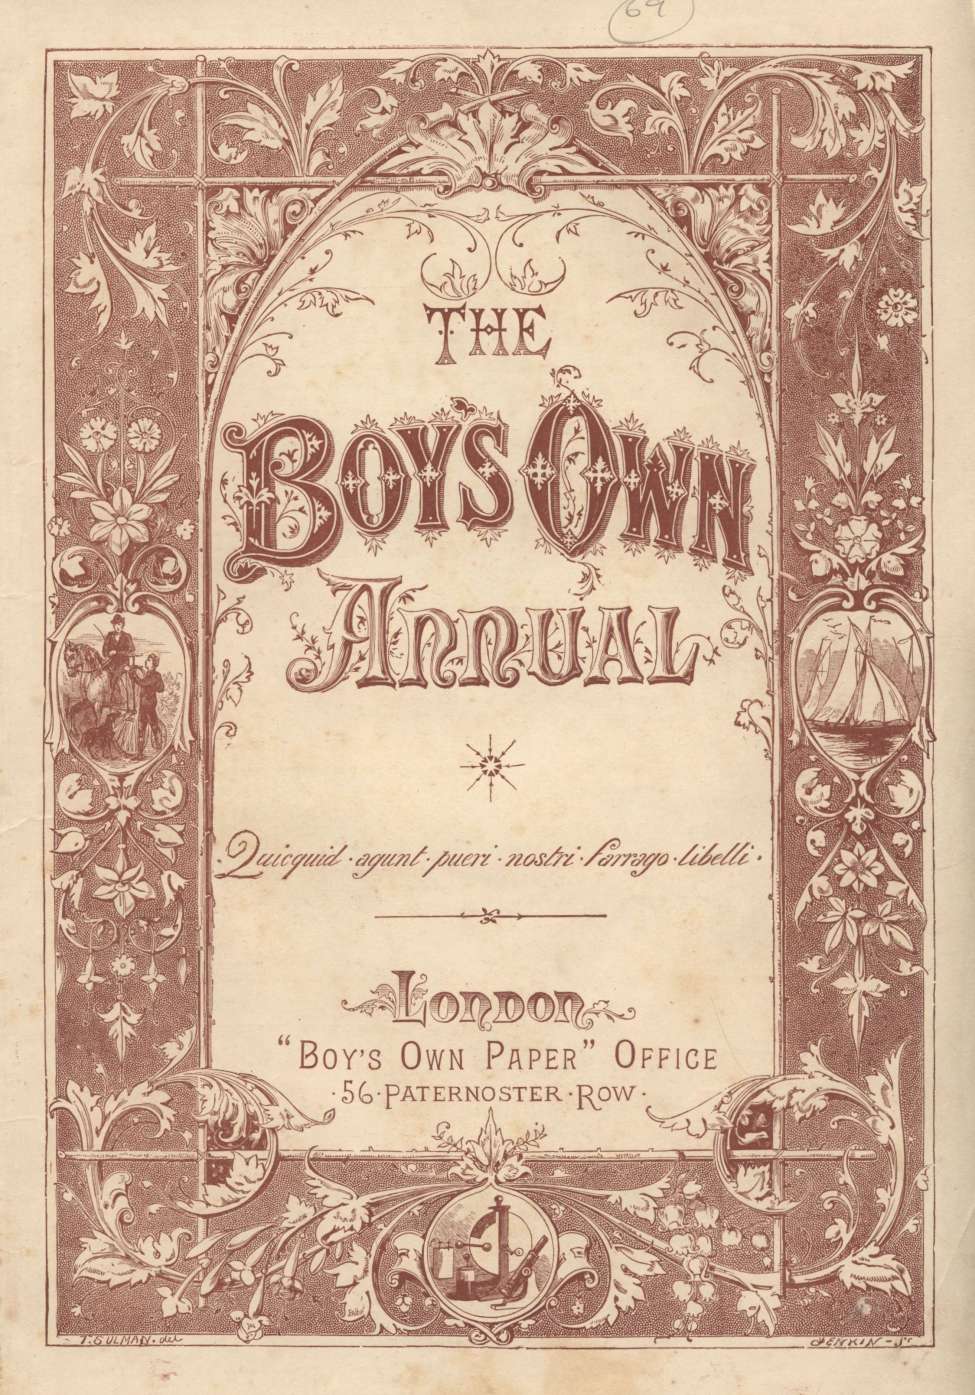 Comic Book Cover For The Boy's Own Paper v14 Index 1891-92